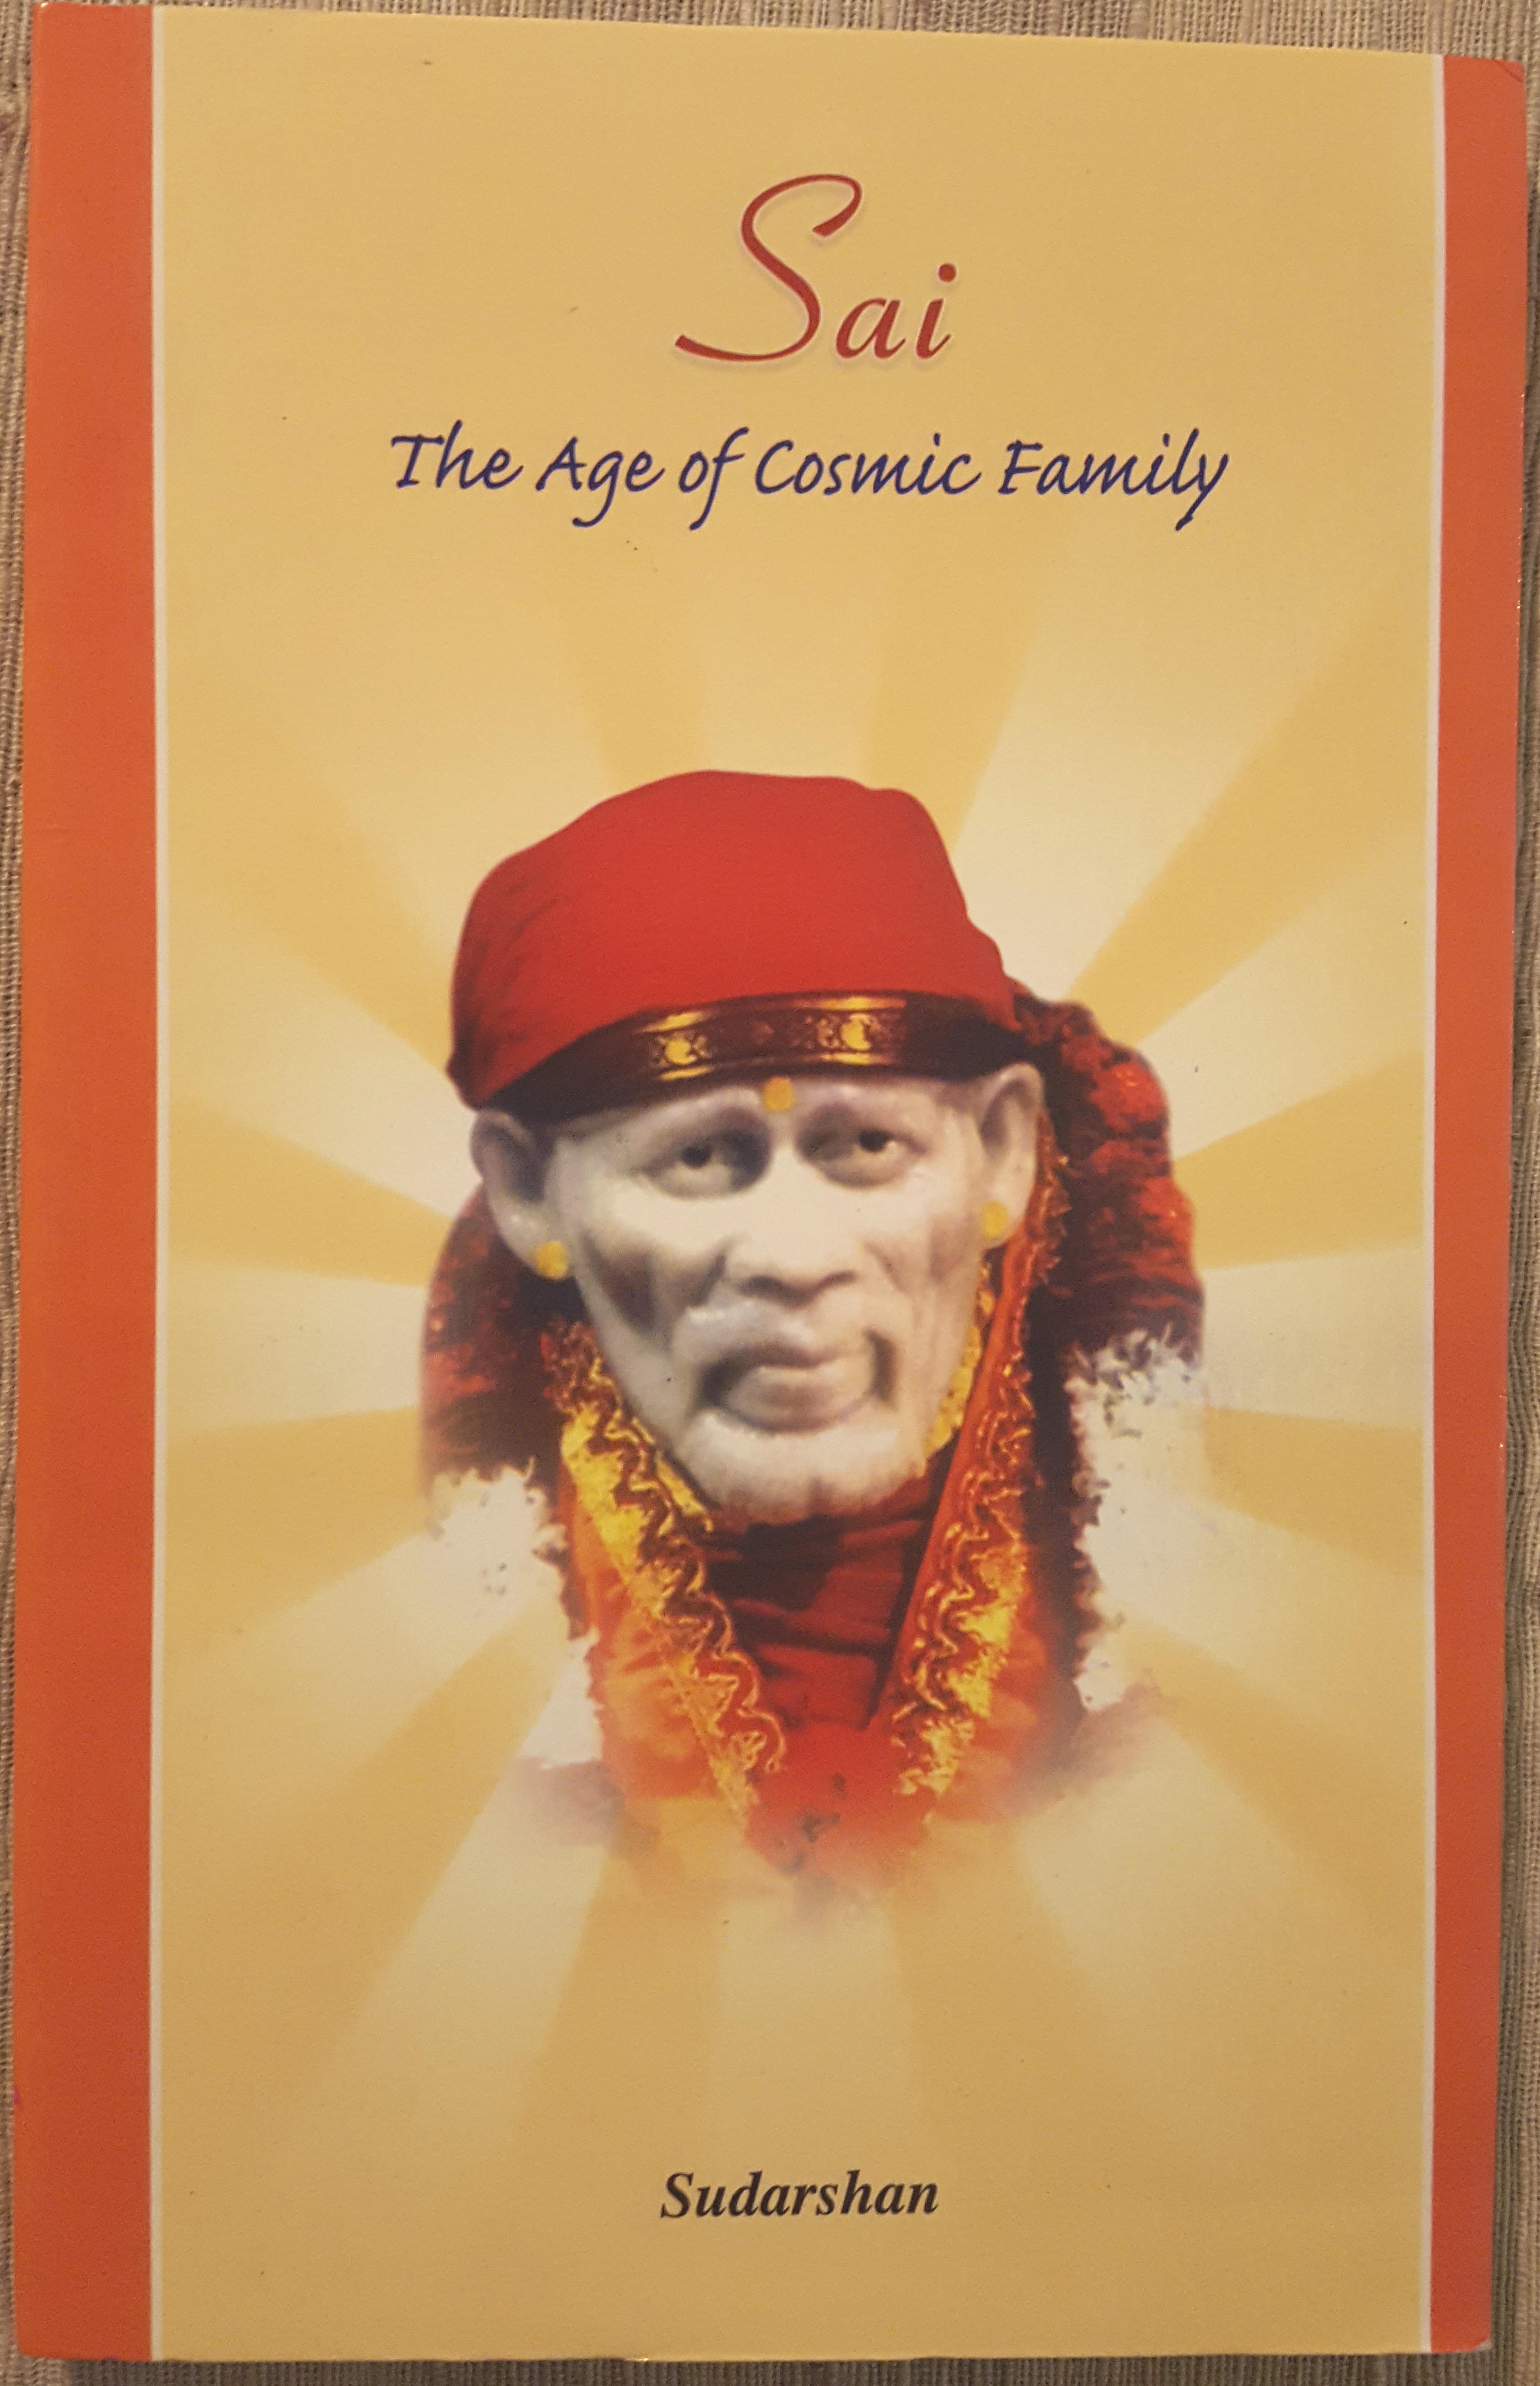 Shirdi Sai Baba Temple Frankfurt Germany (Deutschland) recommended book - Sai the age of cosmic family .